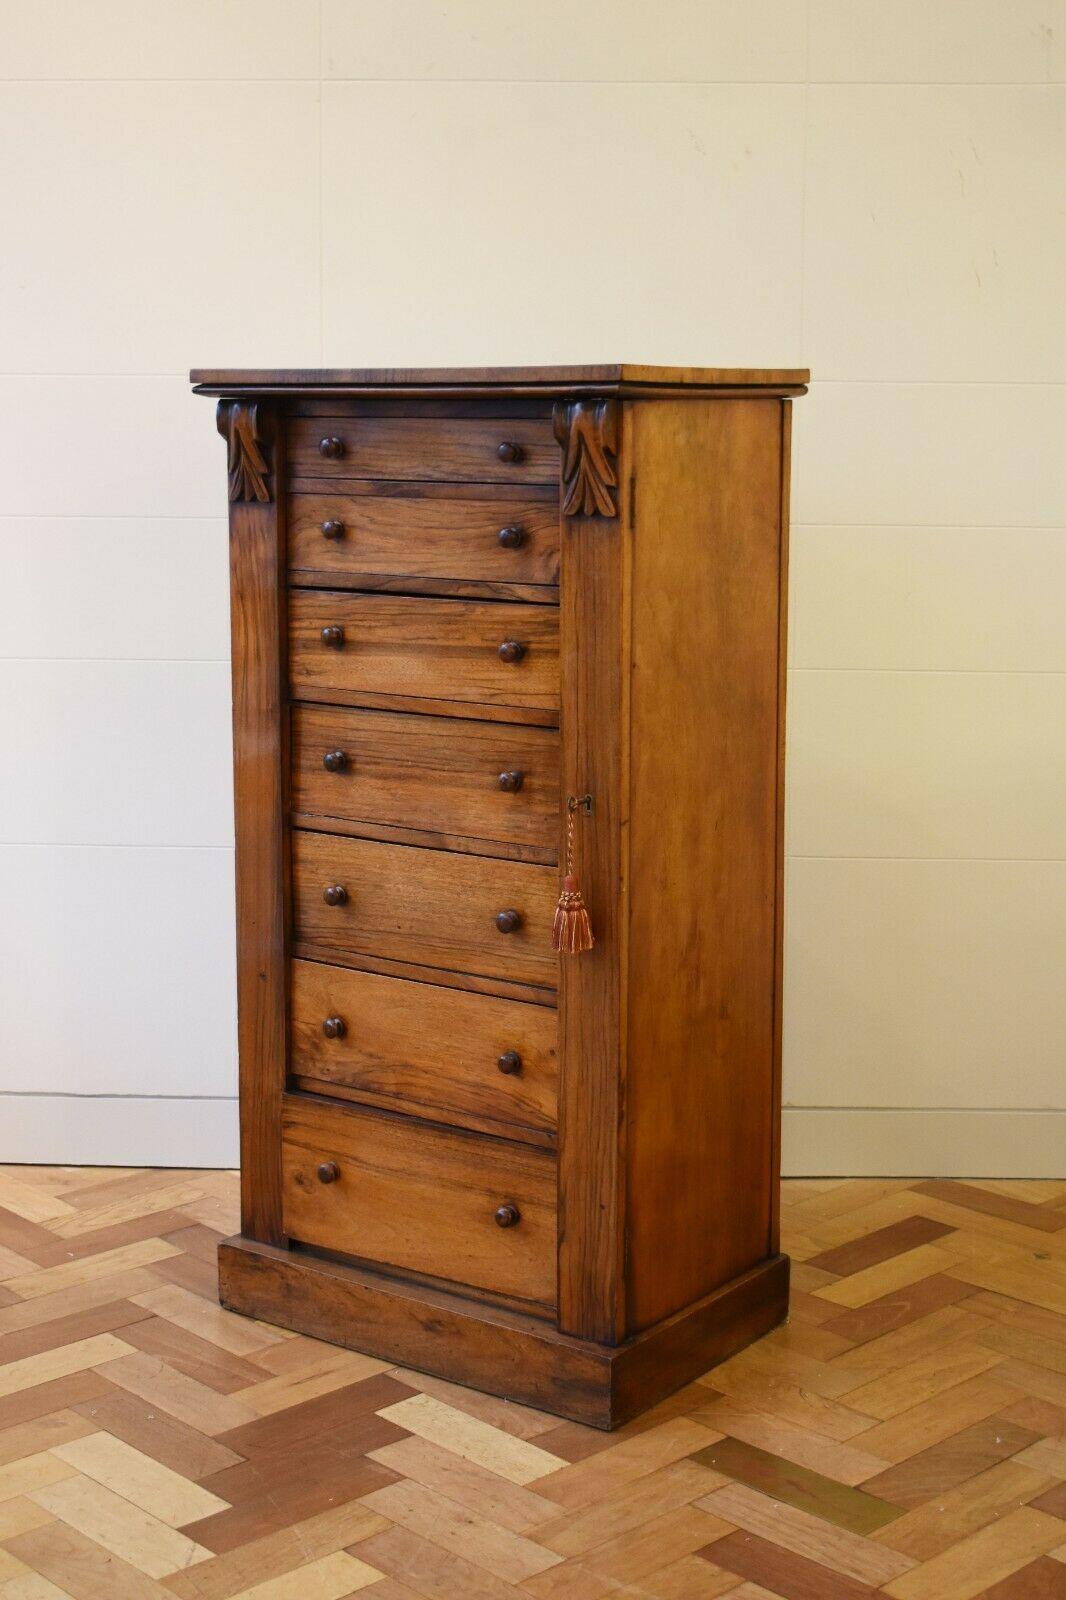 A superb Victorian Wellington Rosewood Chest c.1890's

This rare and unique piece boasts a bank of seven graduated drawers that are enclosed behind a lockable side panel, that can be opened with its original and beautiful key. 

The wood features a